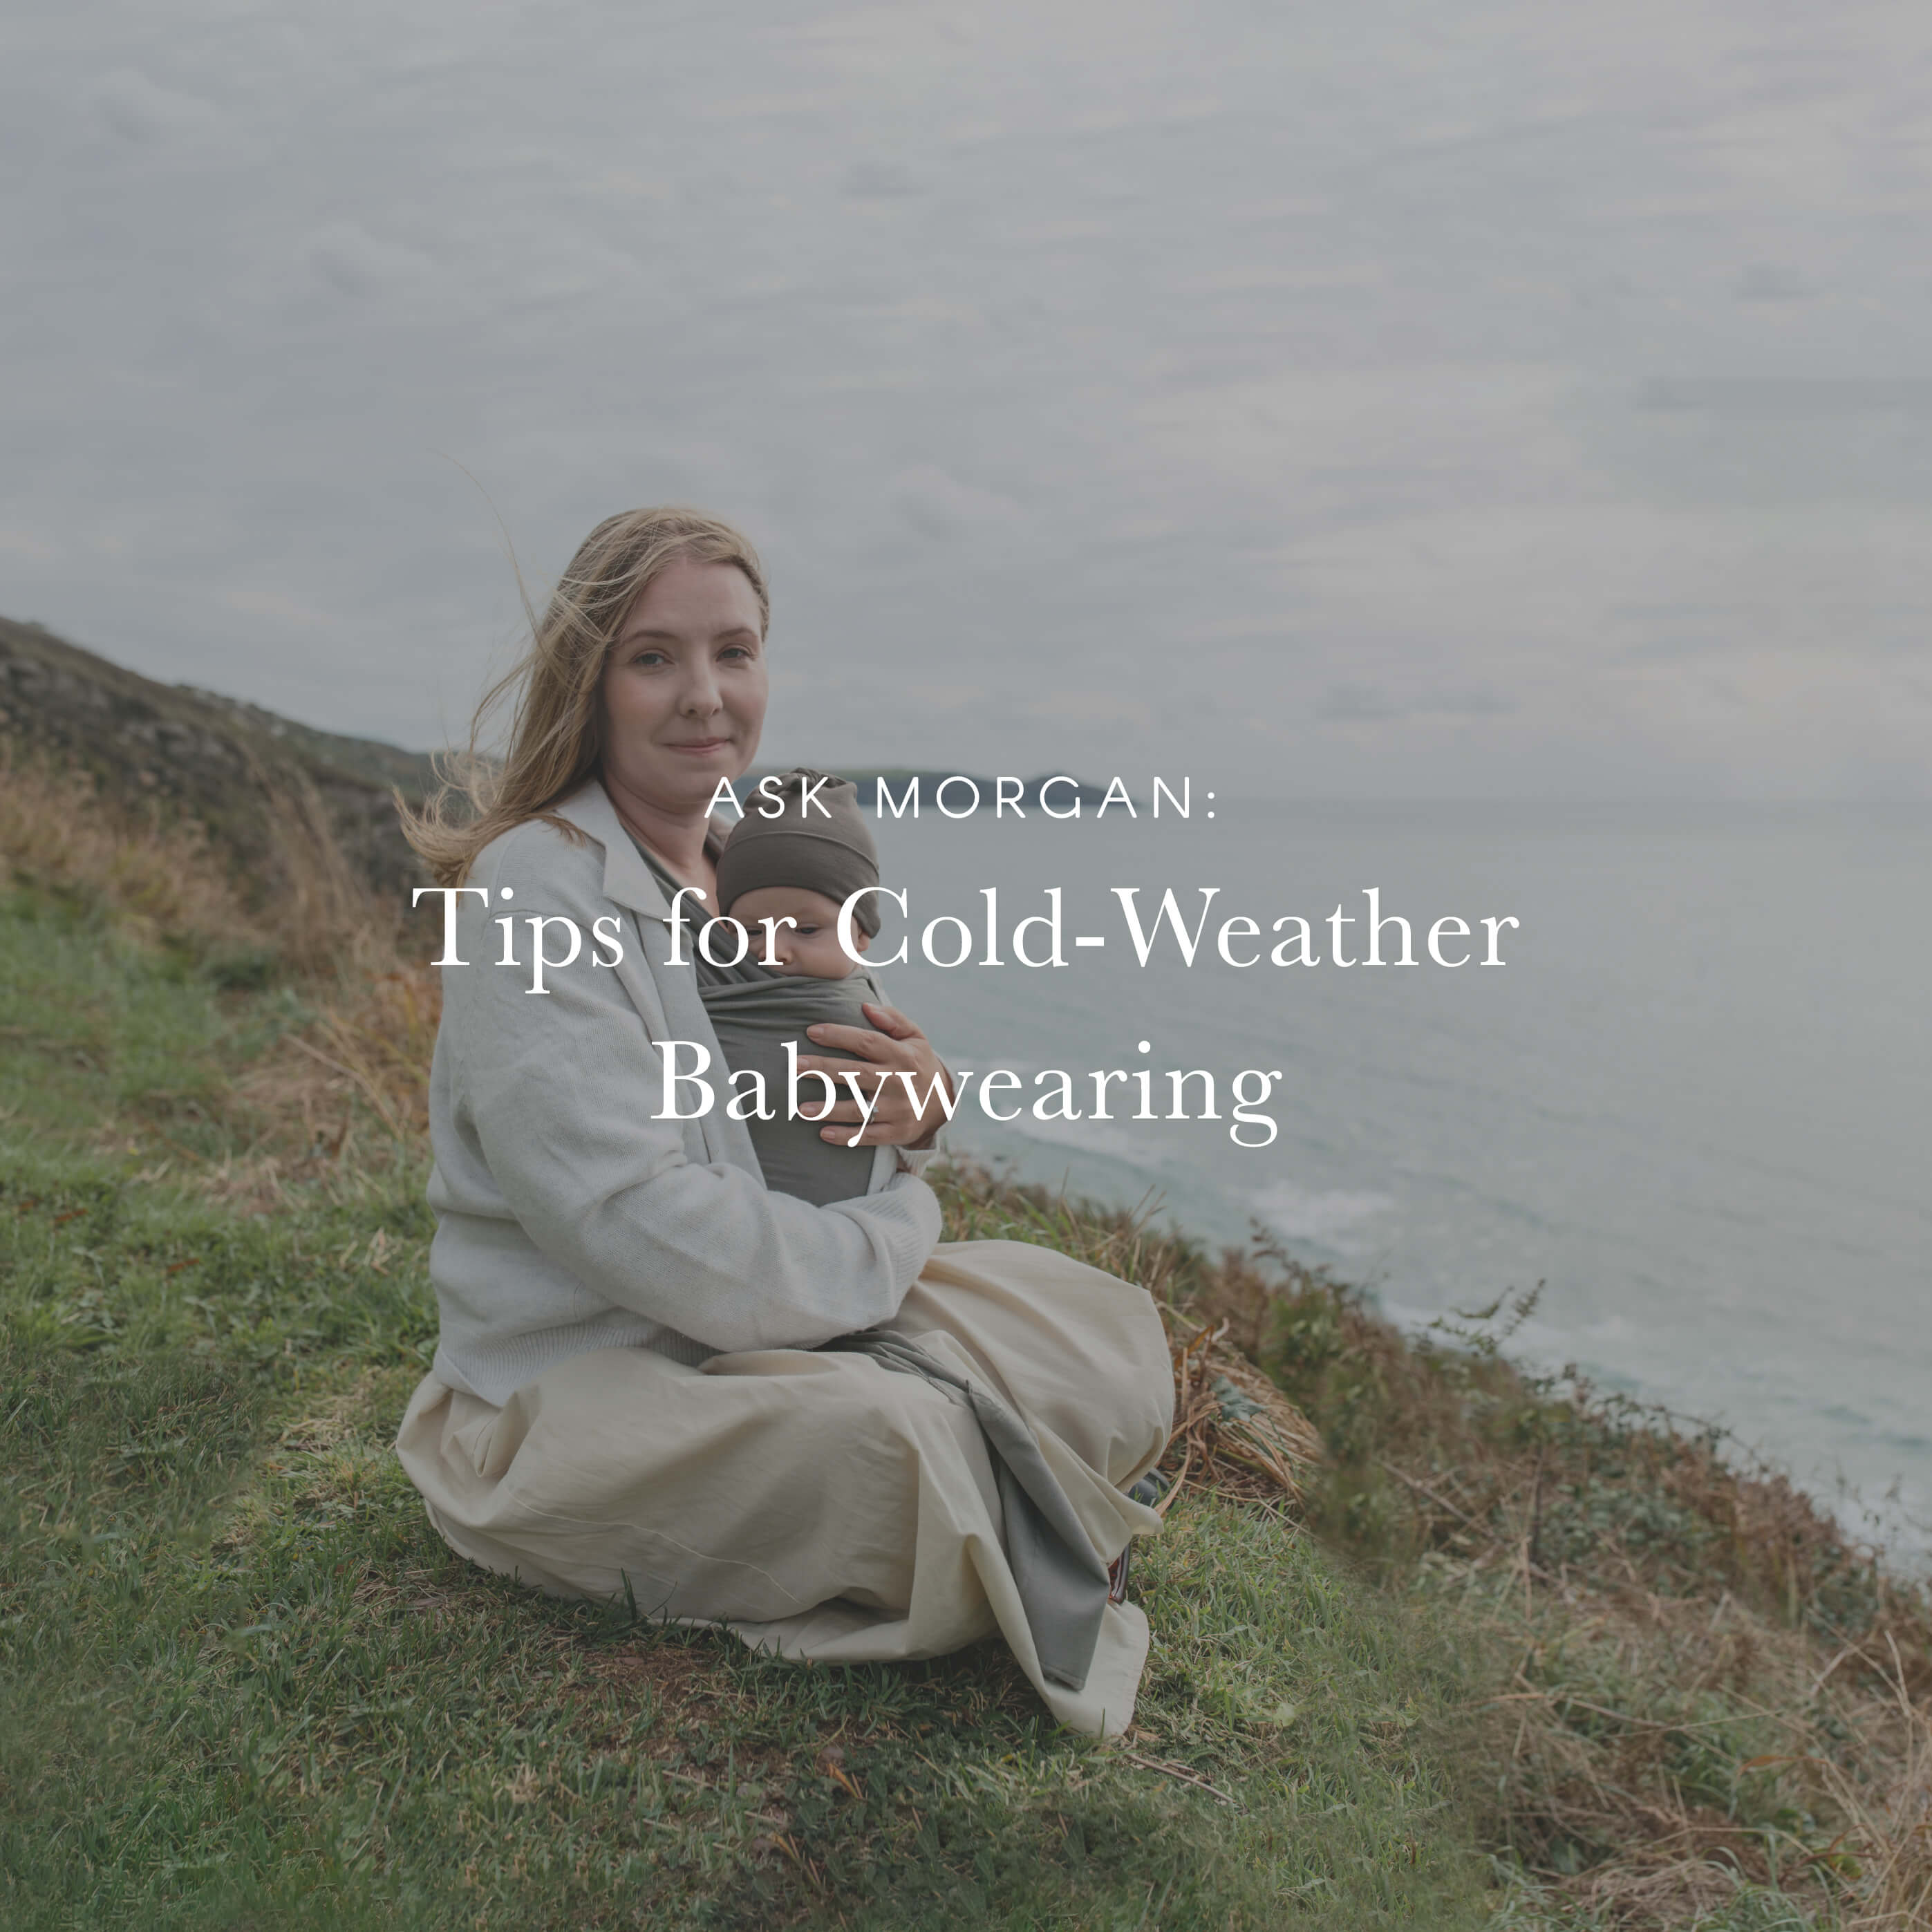 Ask Morgan: Tips for Cold-Weather Babywearing